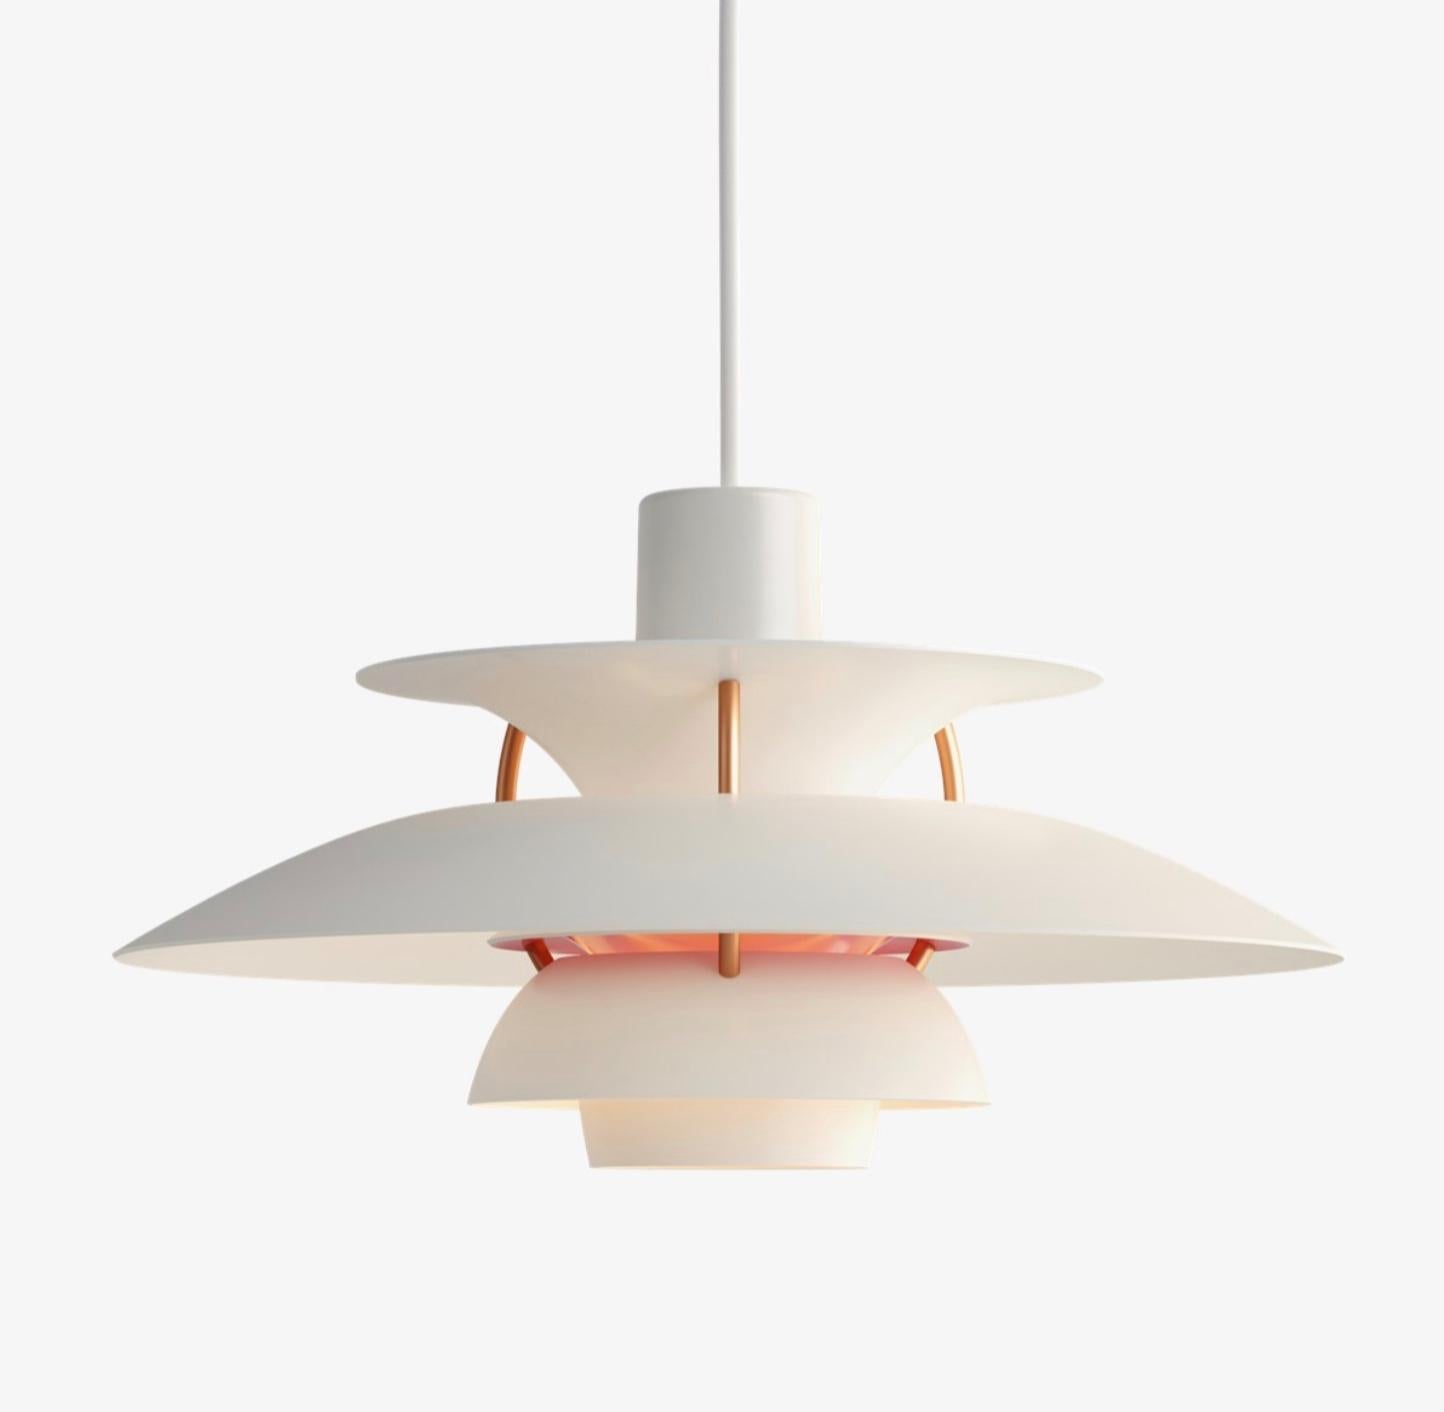 Poul Henningsen PH5 mini pendant for Louis Poulsen. Designed 1958, Mini in 2017. New, current production.

Poul Henningsen developed the PH 5 in 1958 in response to constant changes made to the shape and size of incandescent bulbs by bulb